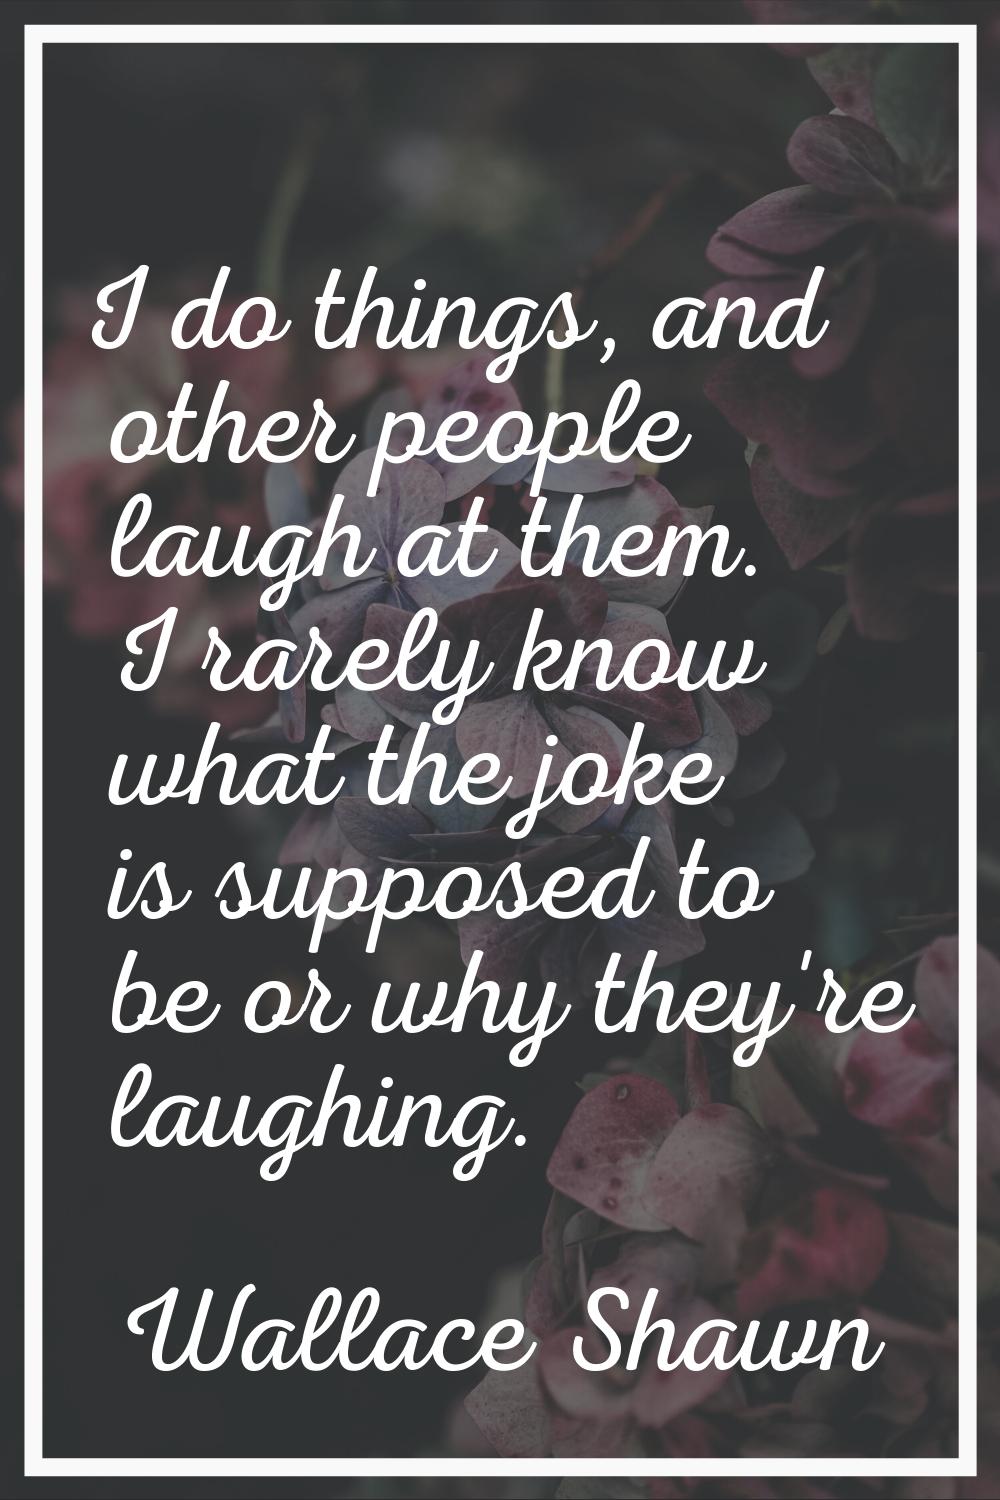 I do things, and other people laugh at them. I rarely know what the joke is supposed to be or why t